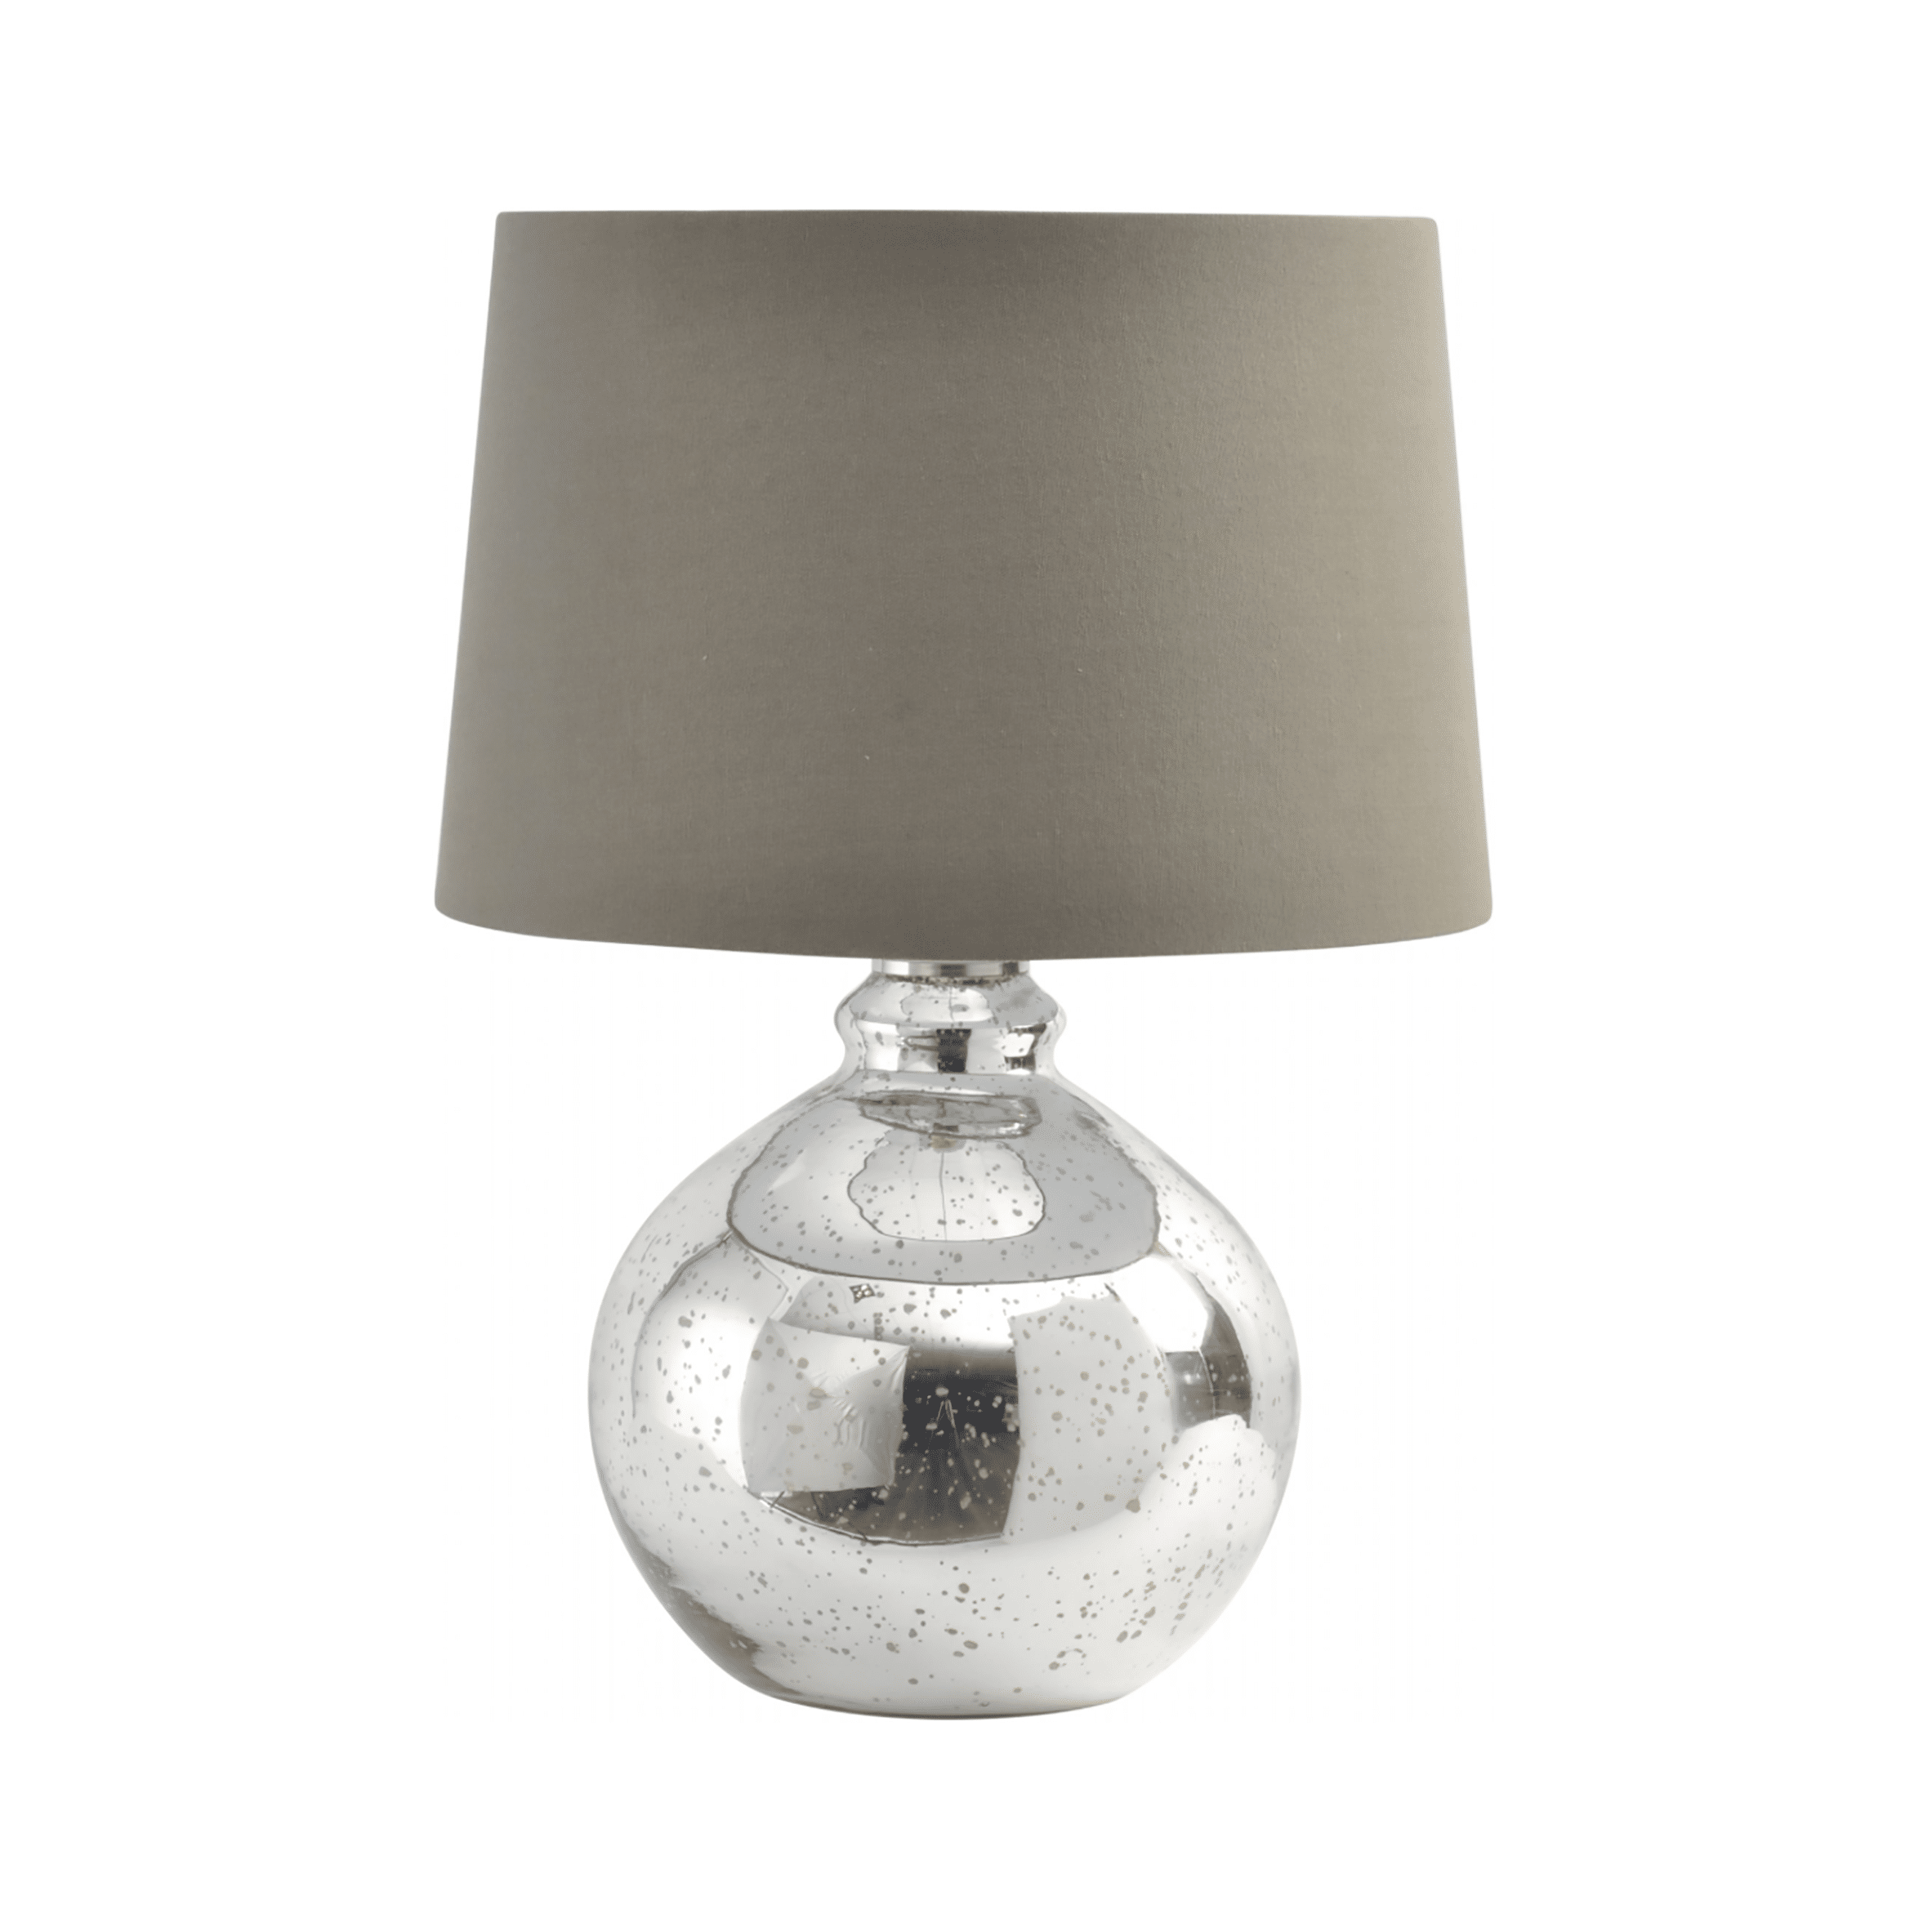 Antique Sphere Glass Lamp With Taupe, Spherical Glass Table Lamp